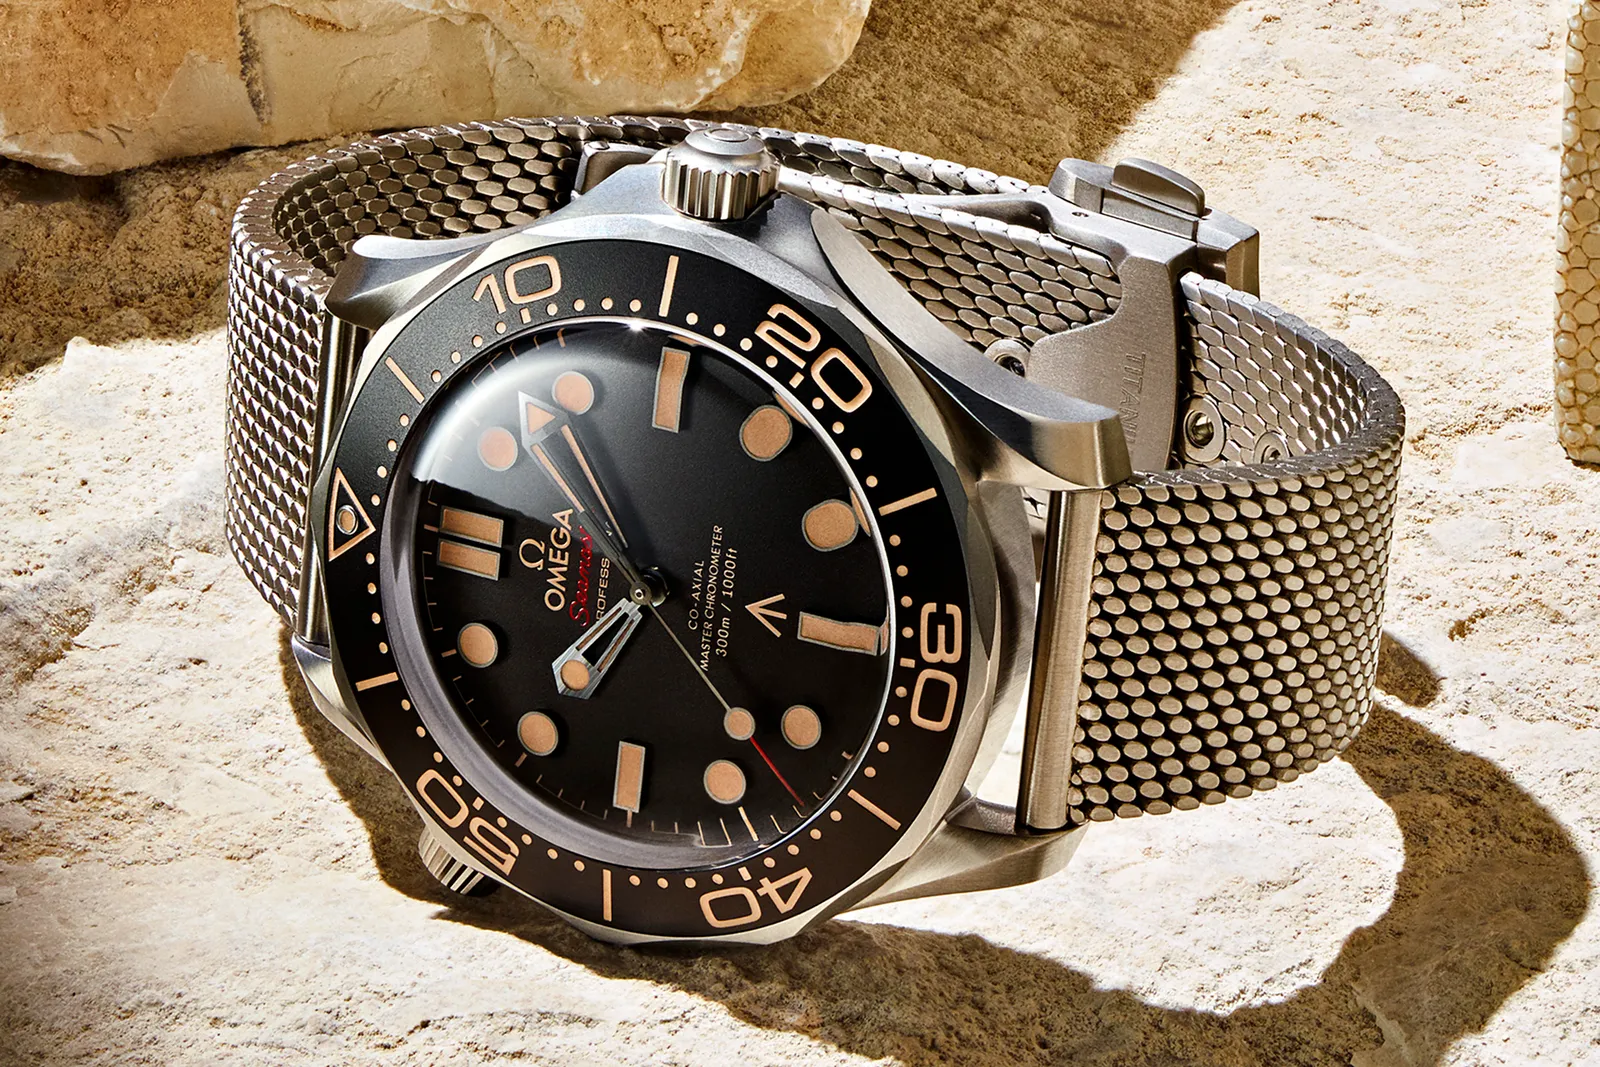 Diver’s Watch – UK Cheap Omega Seamaster Replica Watches For Men